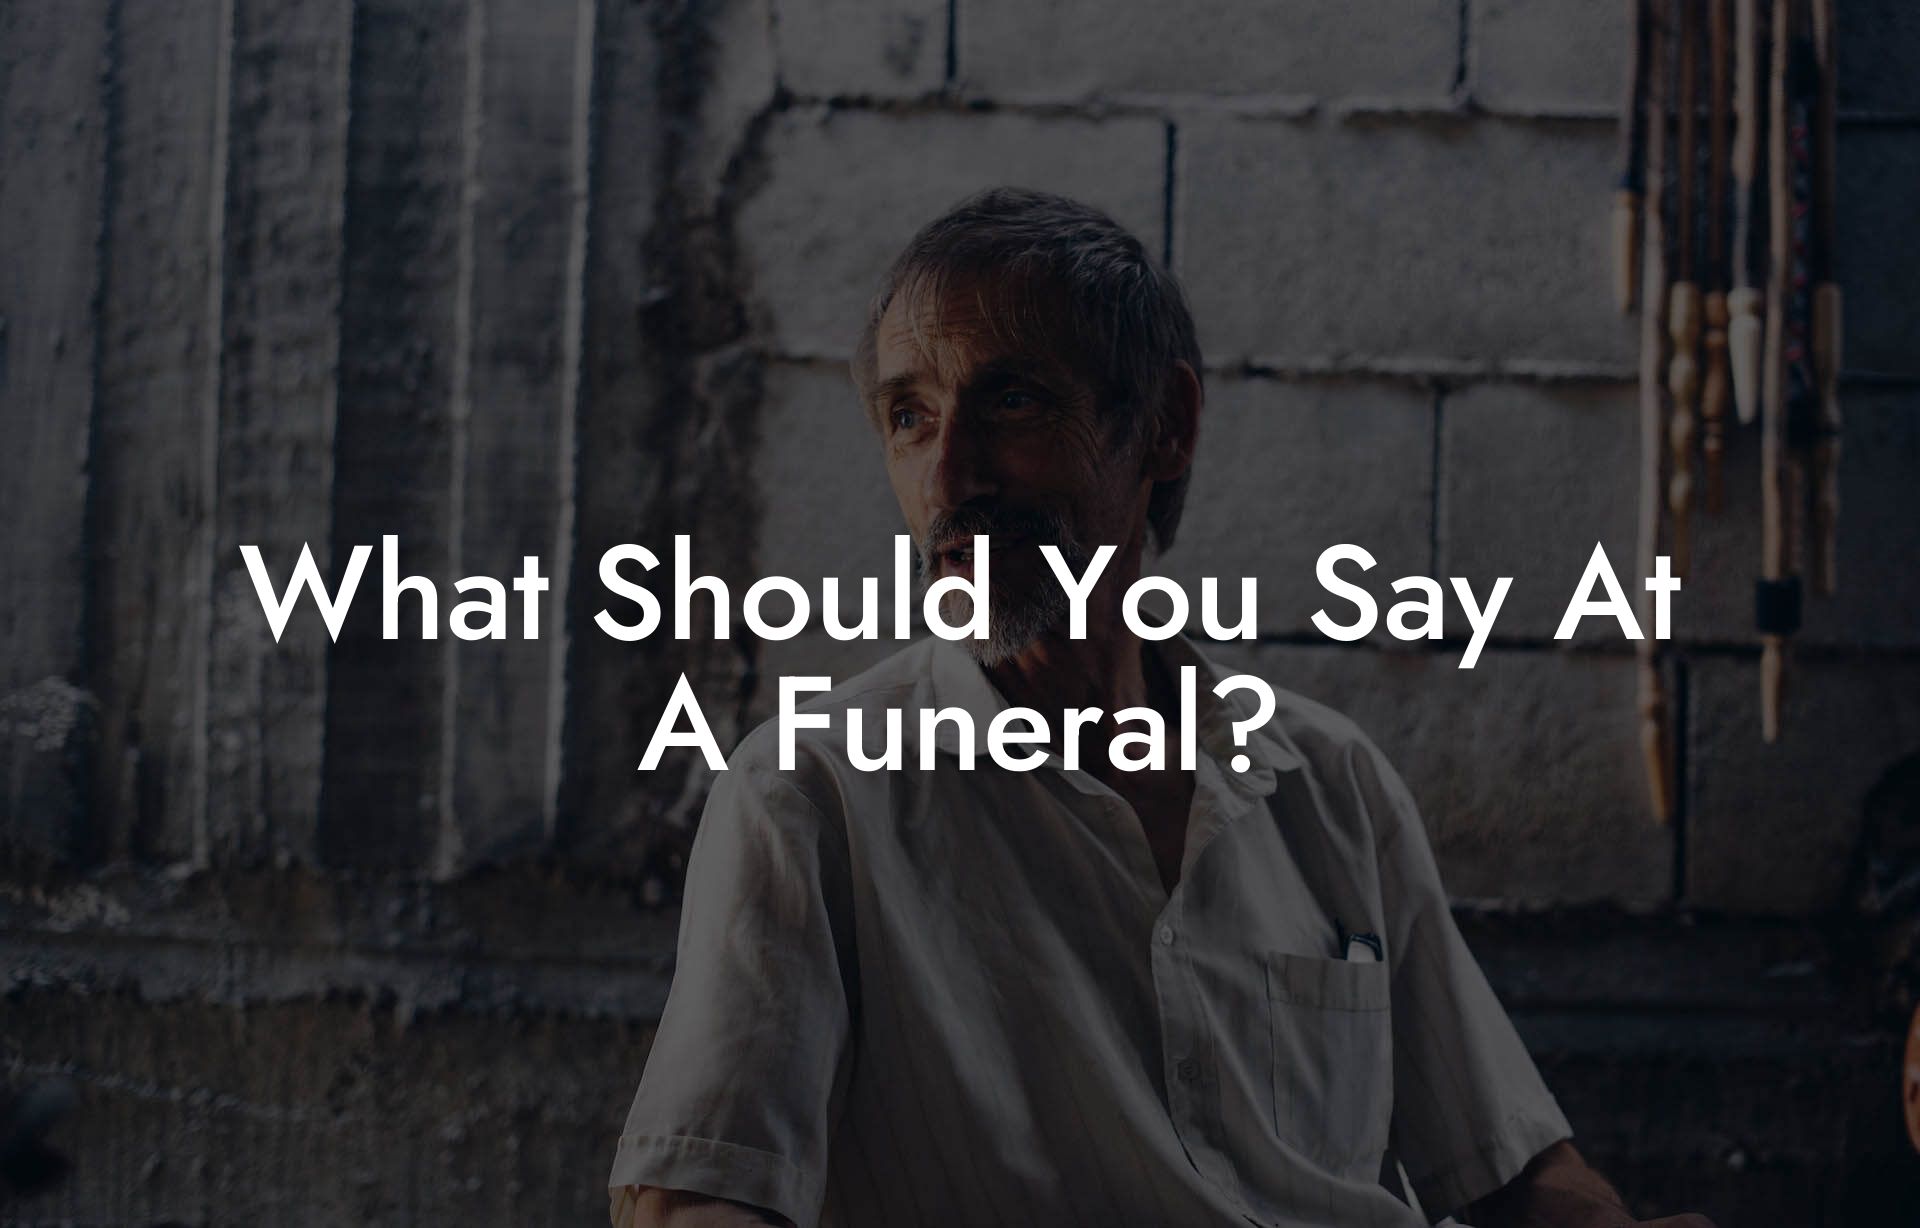 What Should You Say At A Funeral?